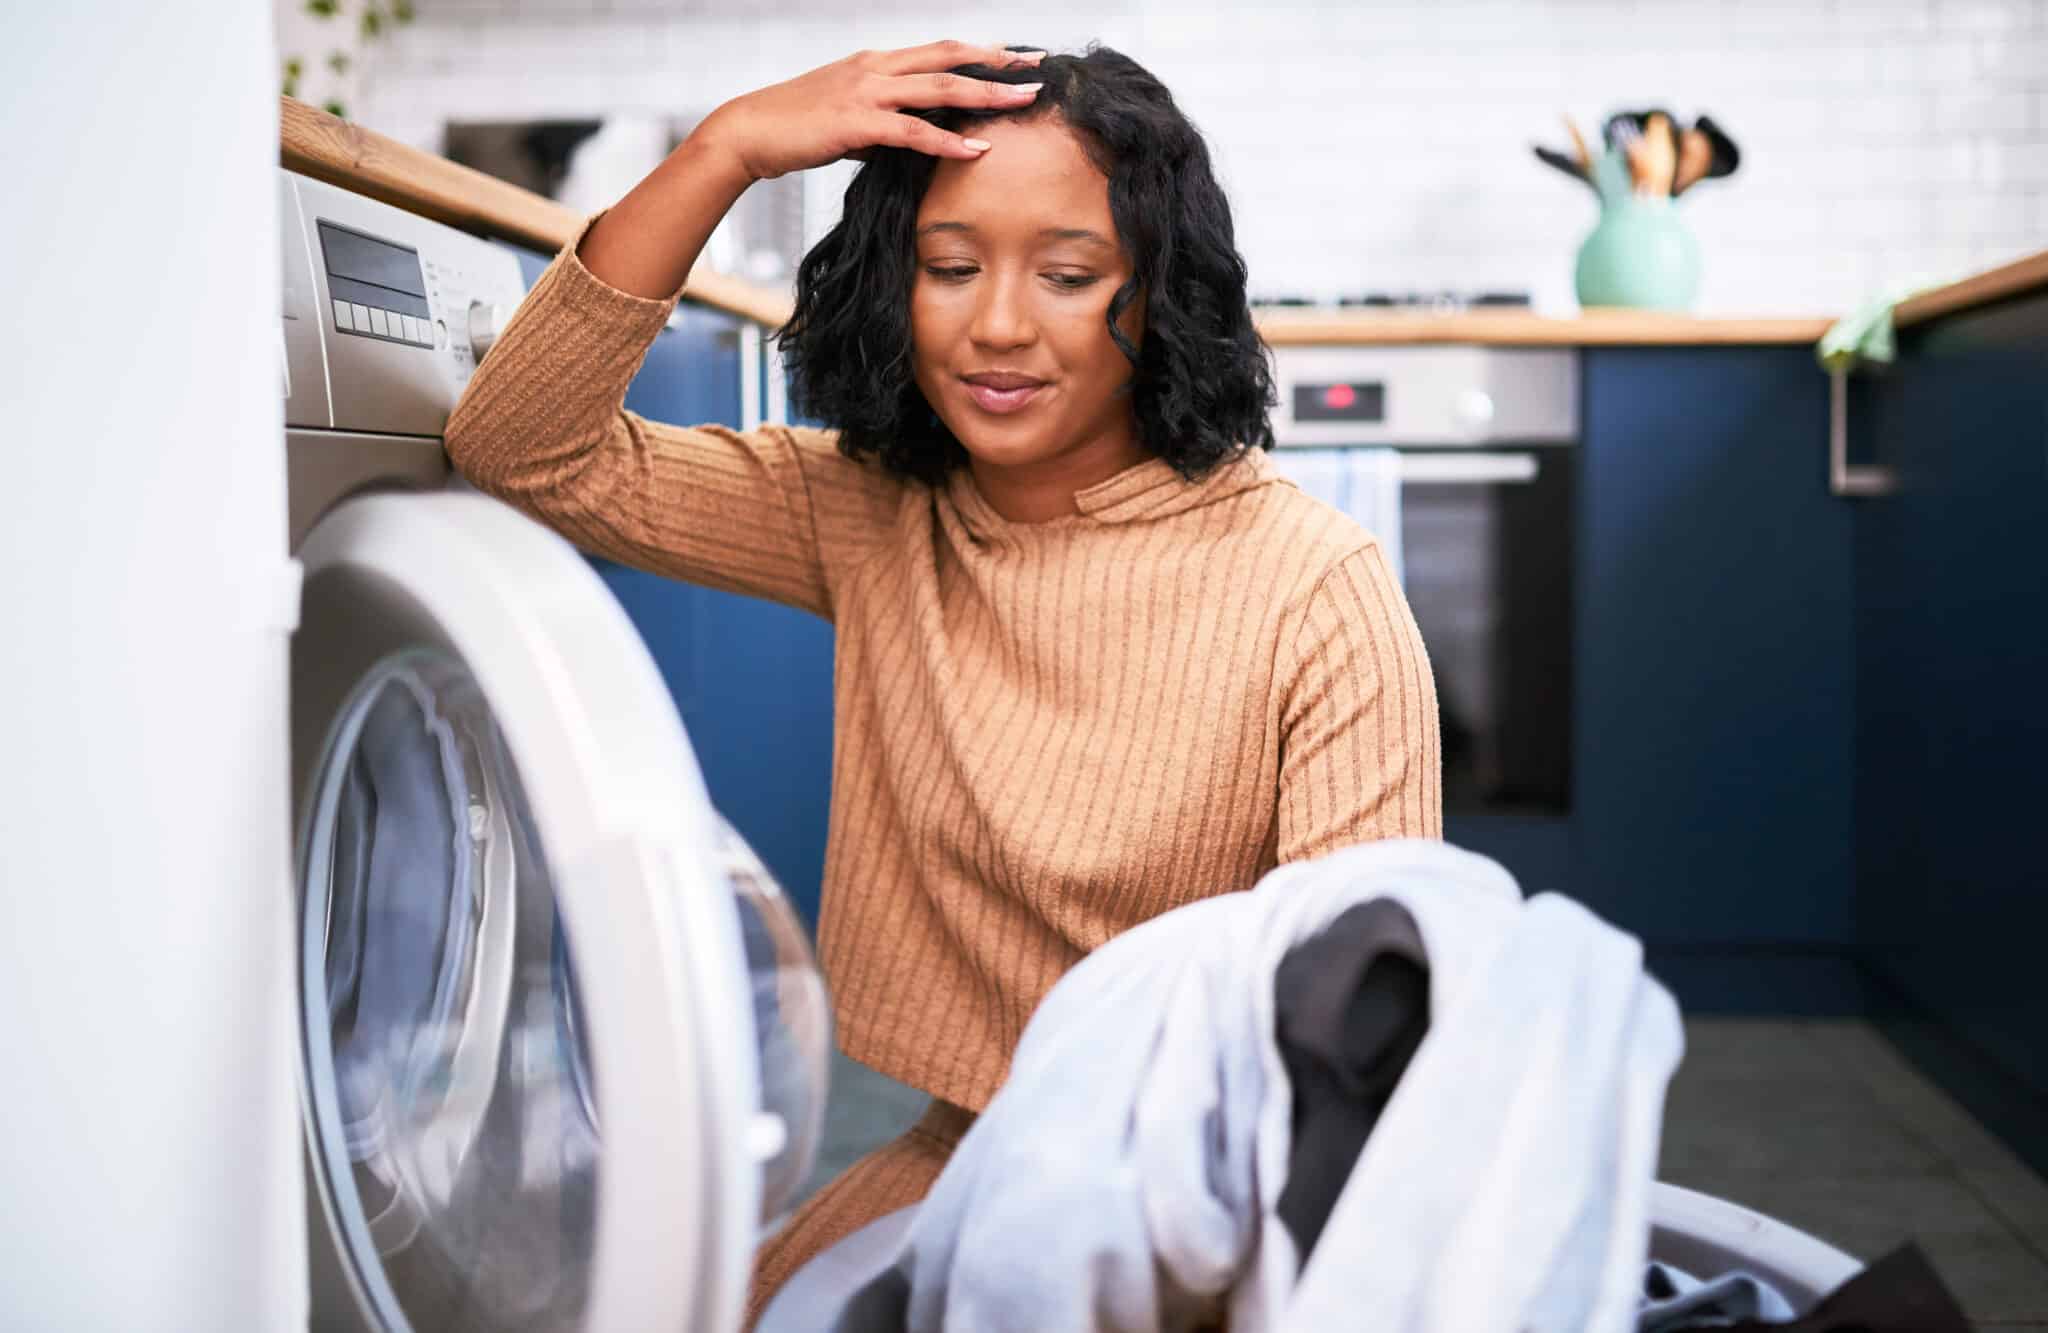 Dryer Not Drying? Here are 6 Tips on What to Do